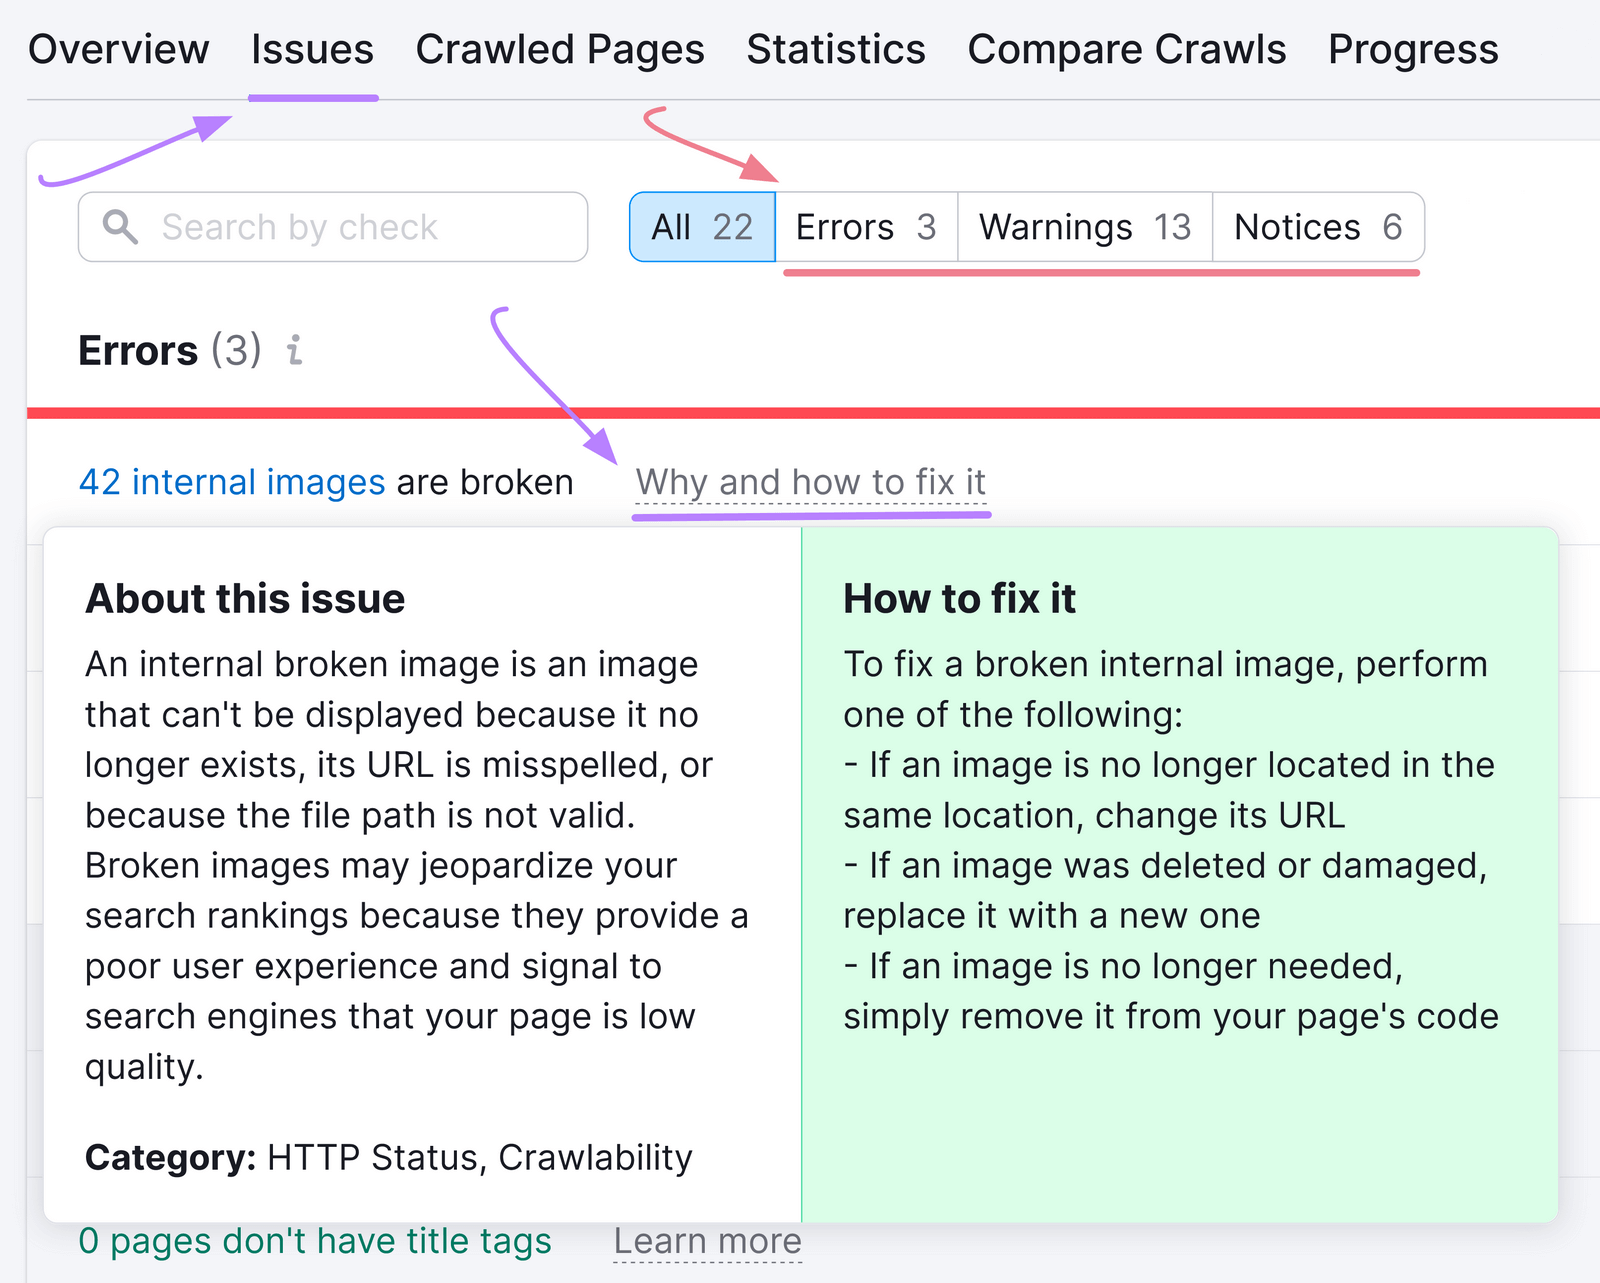 “Why and how to fix it” section in "Issues" tab